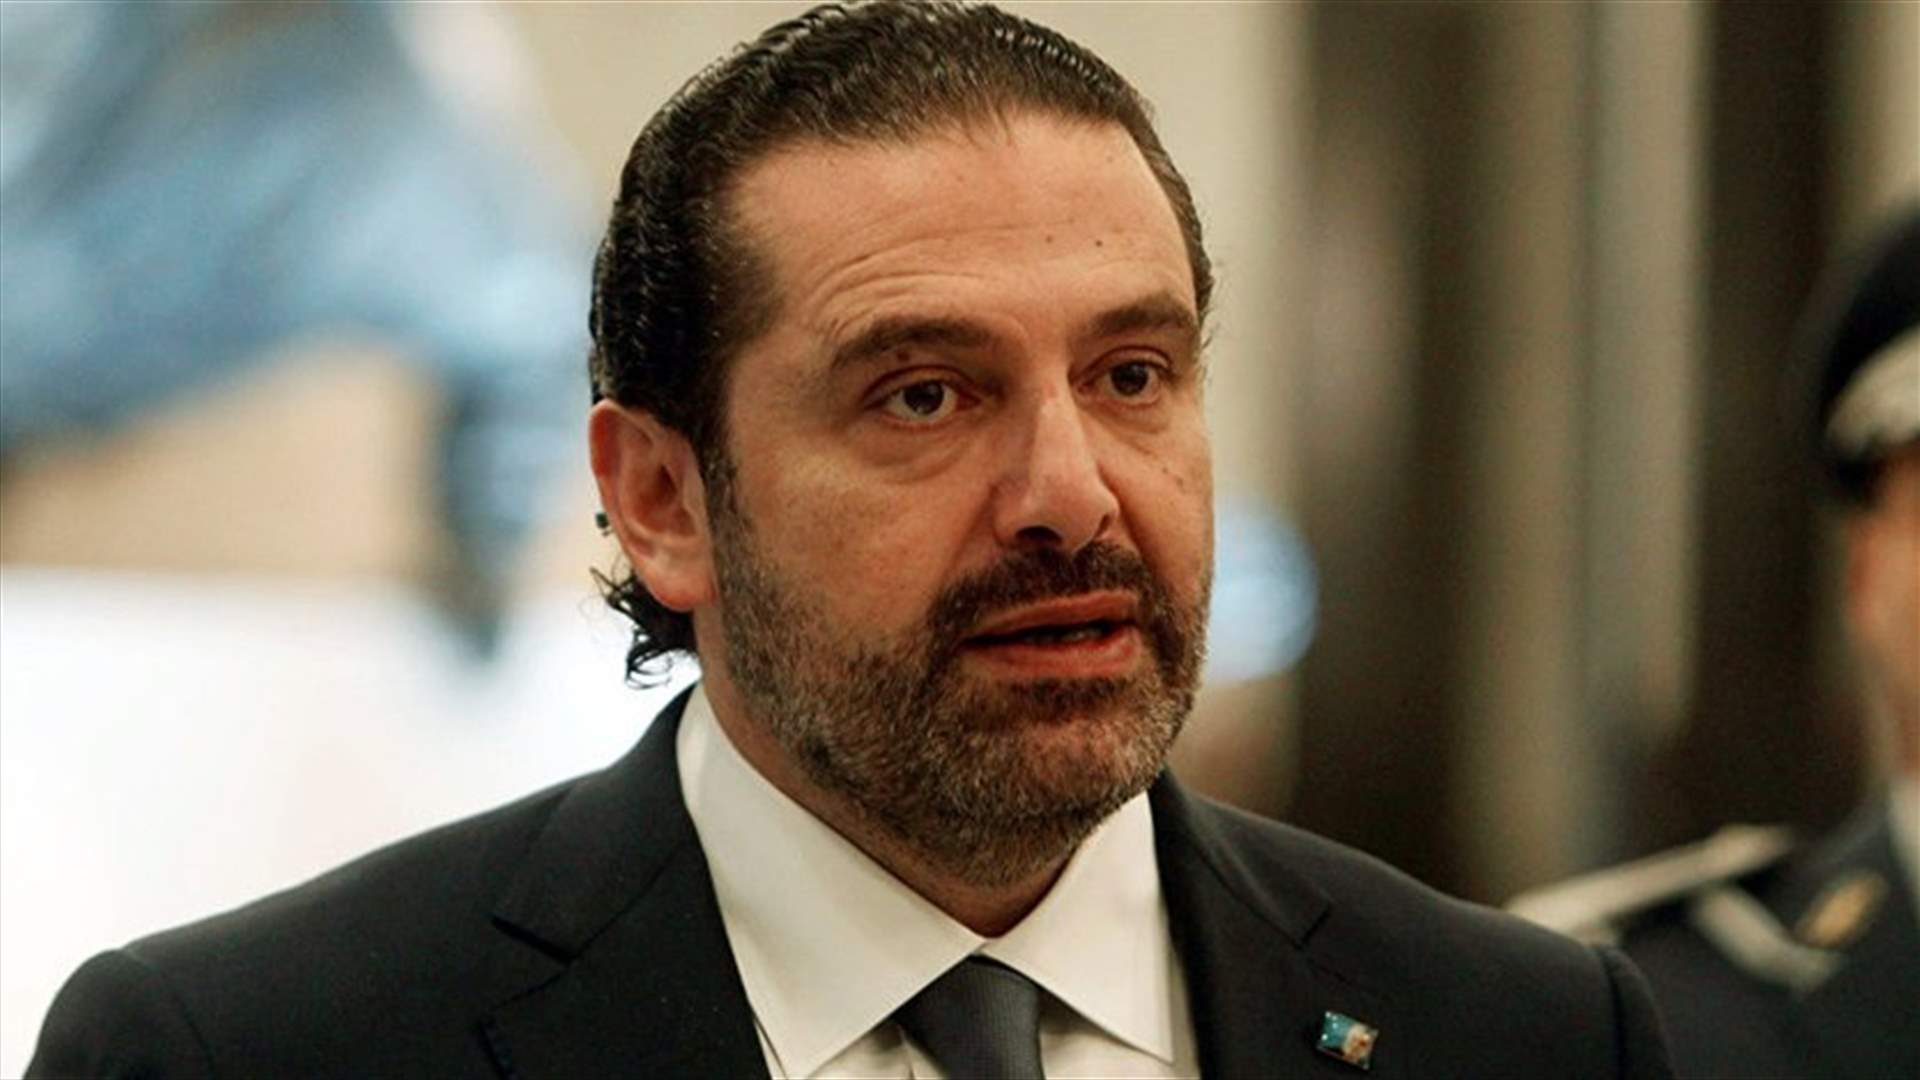 Hariri during cabinet session: Lebanon’s situation remains reassuring as long as we take the necessary measures